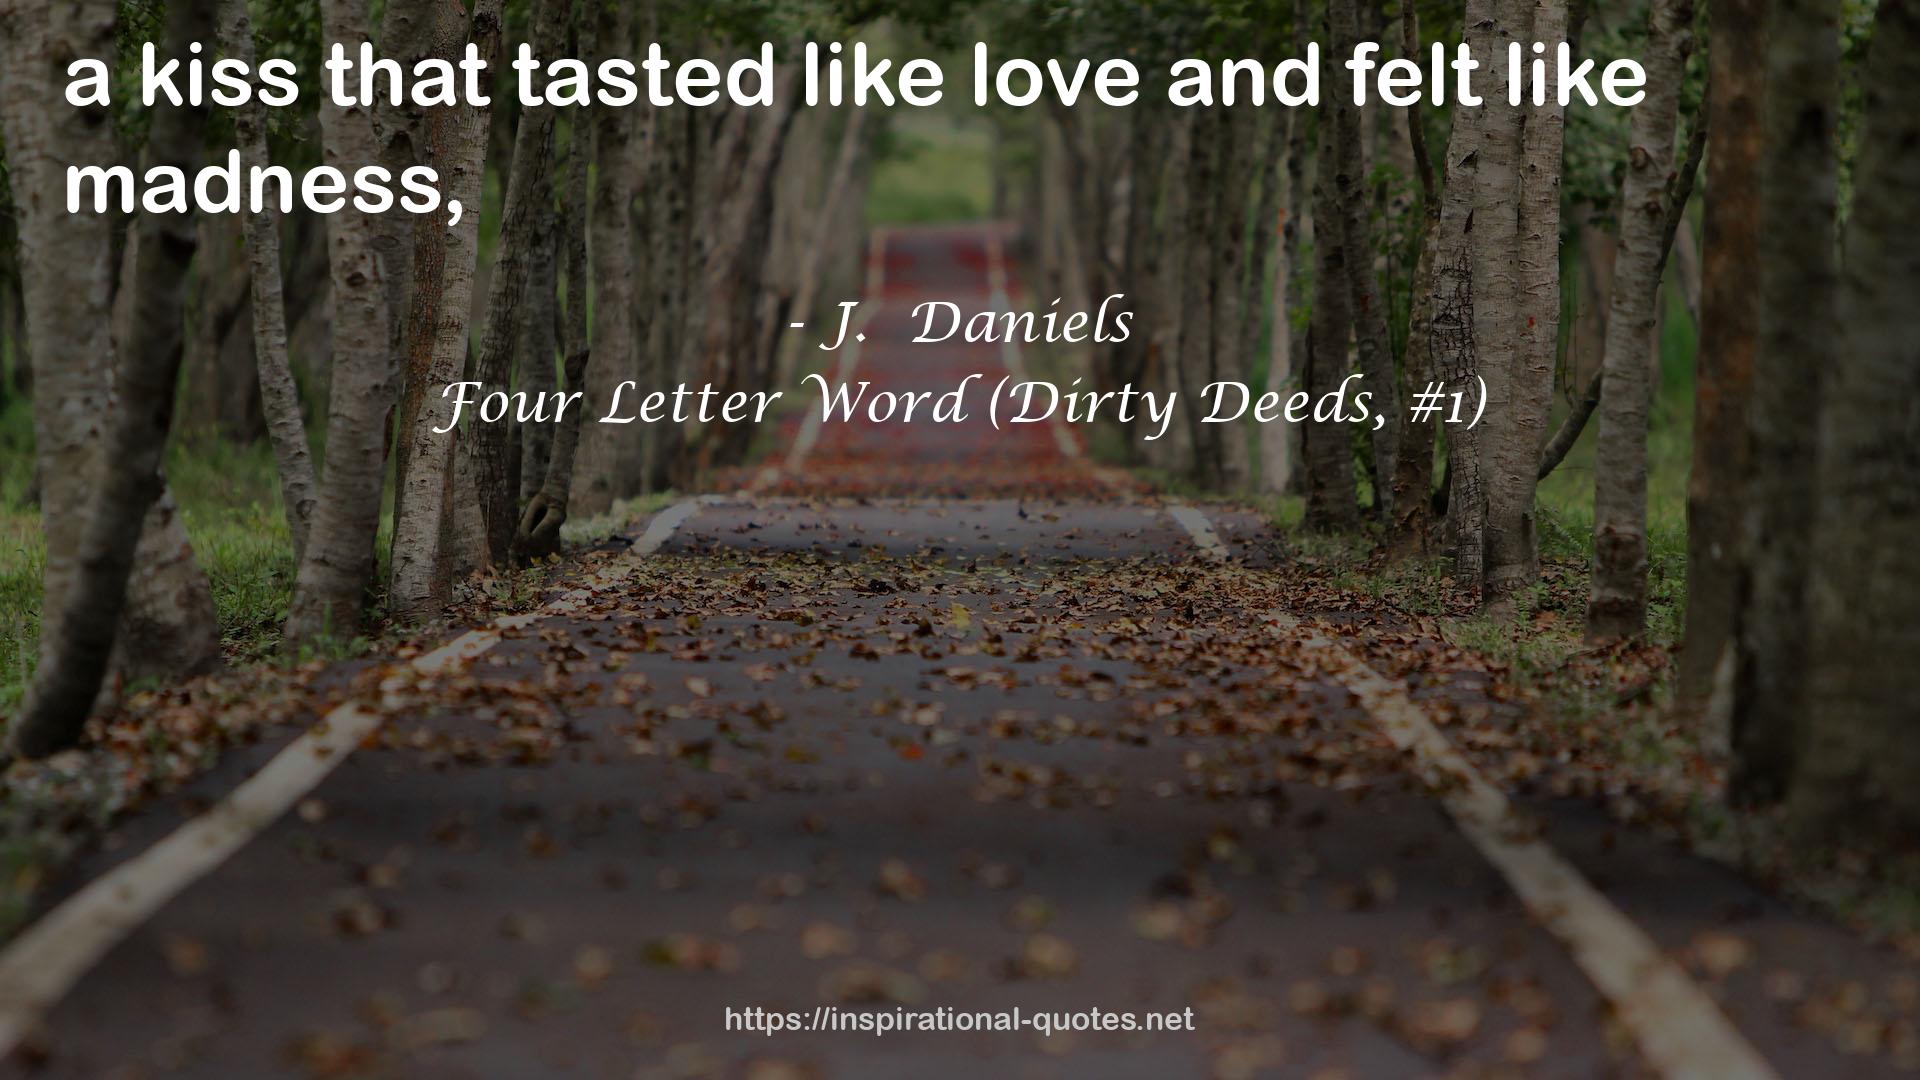 Four Letter Word (Dirty Deeds, #1) QUOTES